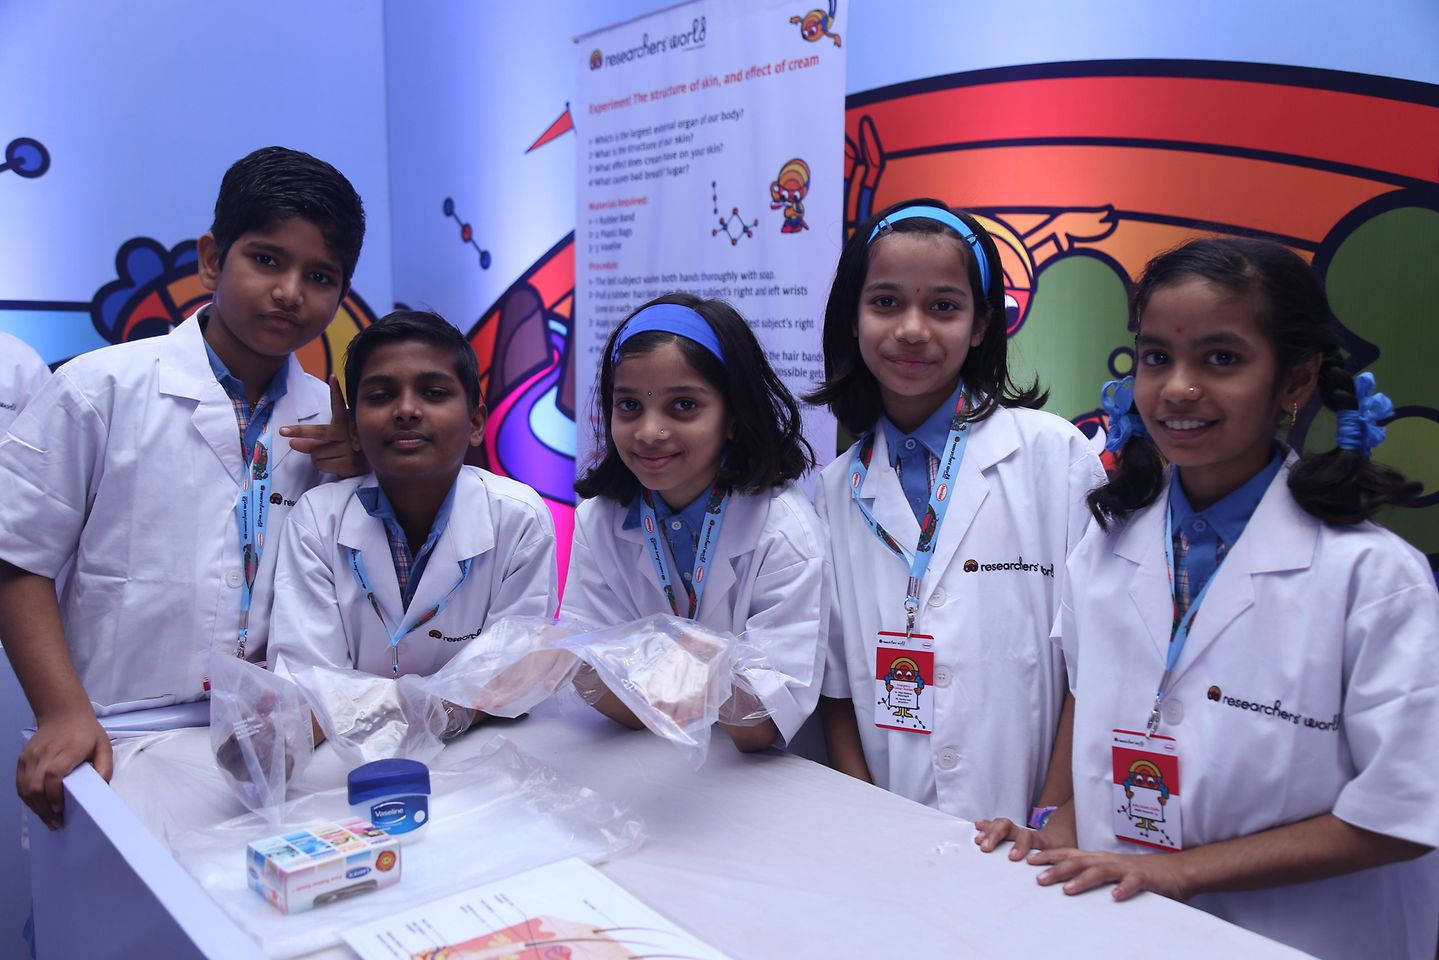 group of Indian children in lab coats standing at a white table